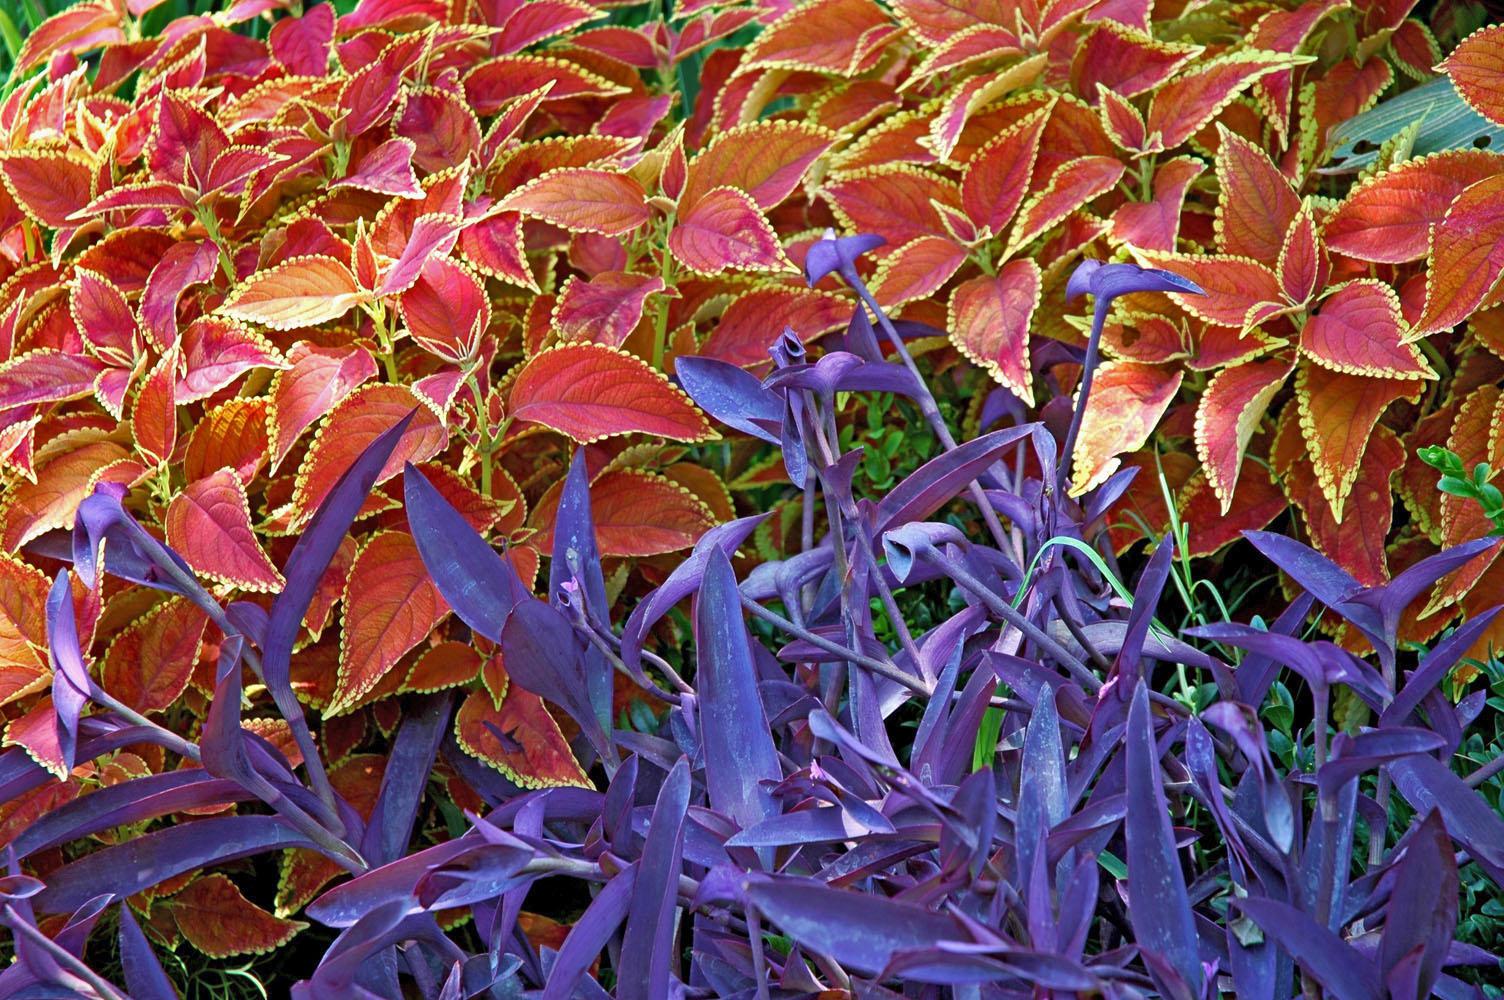 The Rustic Orange coleus produces a striking contrast when planted with the perennial Purple Heart, a vining plant sometimes called Setcresea.